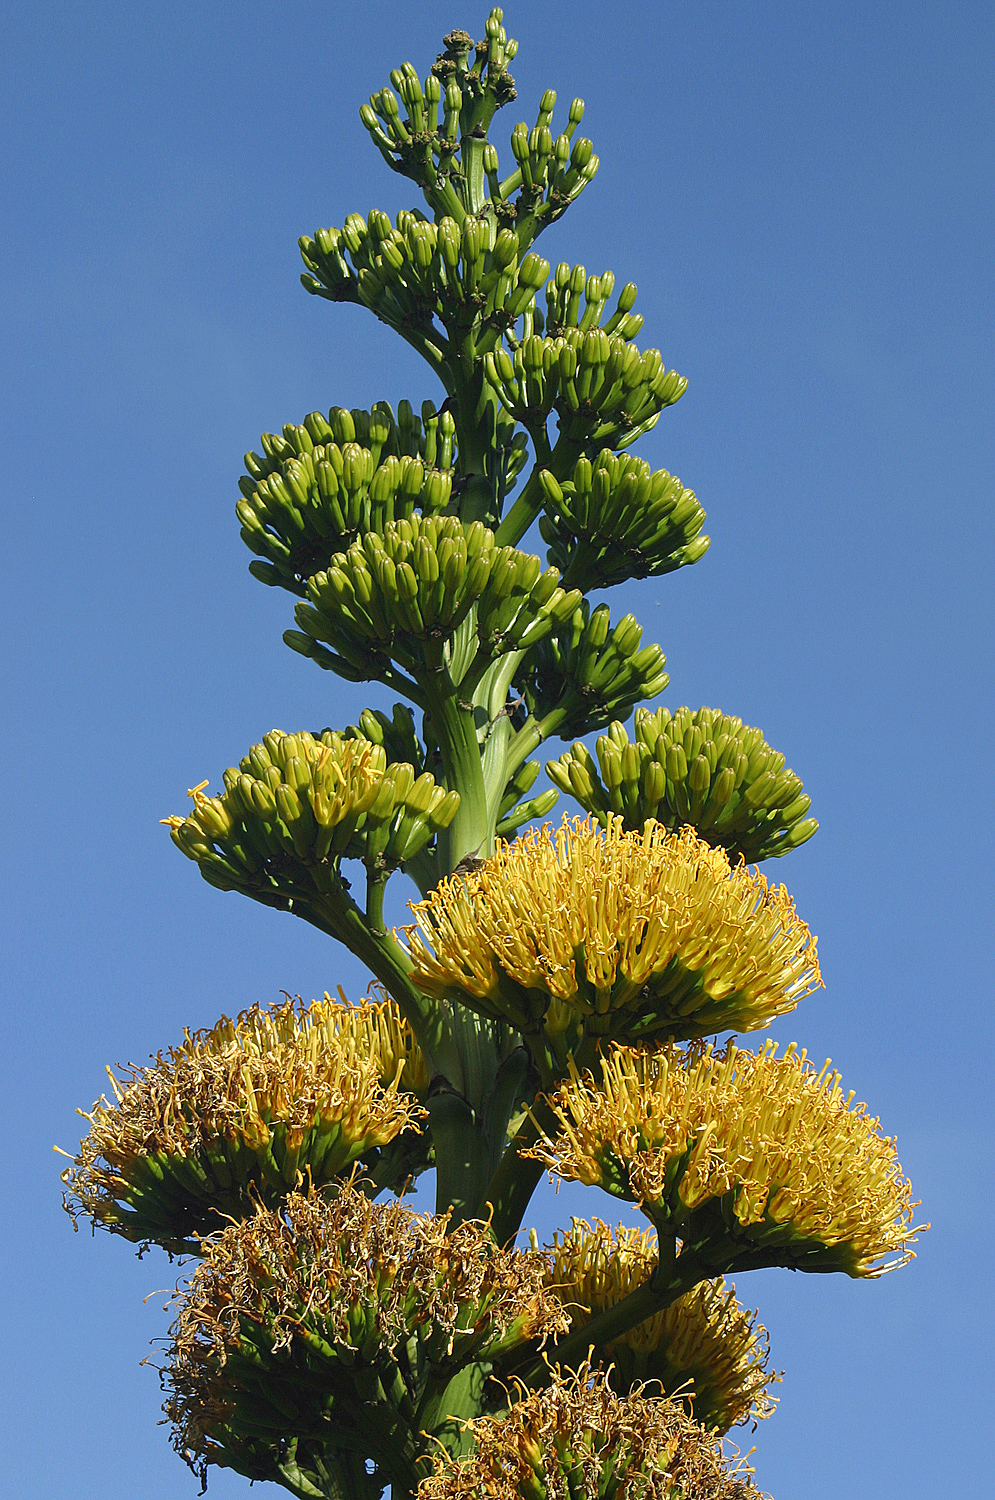 A tall mast of green Agave buds and yellow flowers